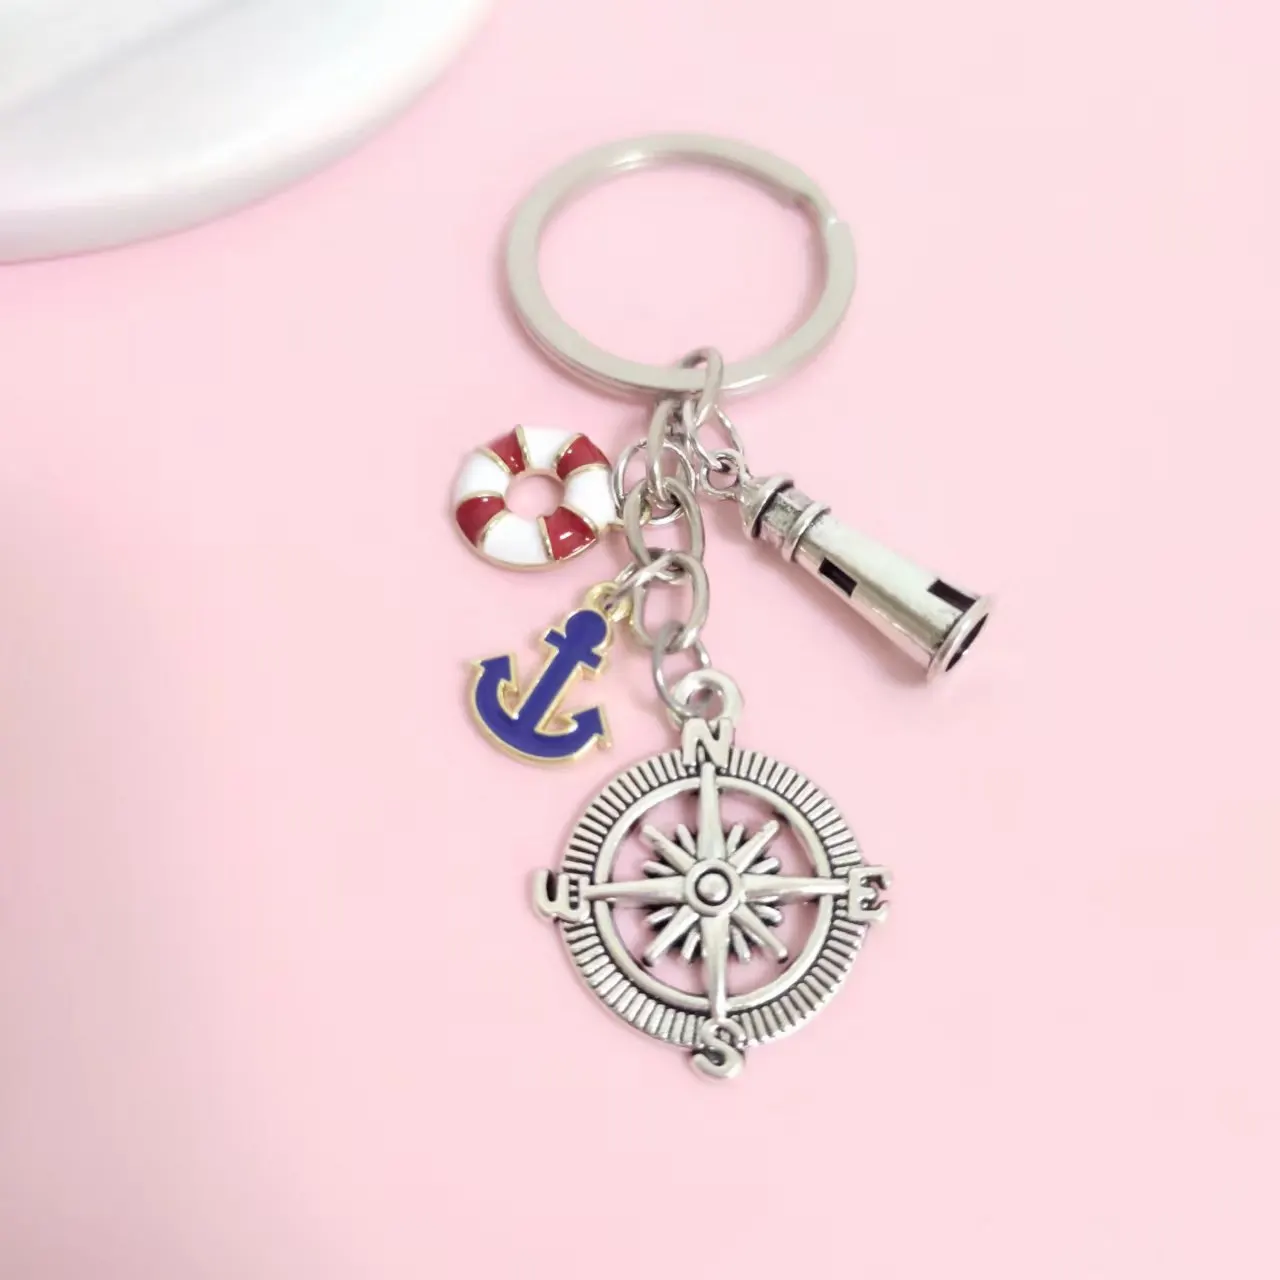 

Lighthouse Rescue Circle Ship Anchor Compass Key Chains, keyring,Silver Color,Women Jewelry Man Accessory Pendant Fashion Gift